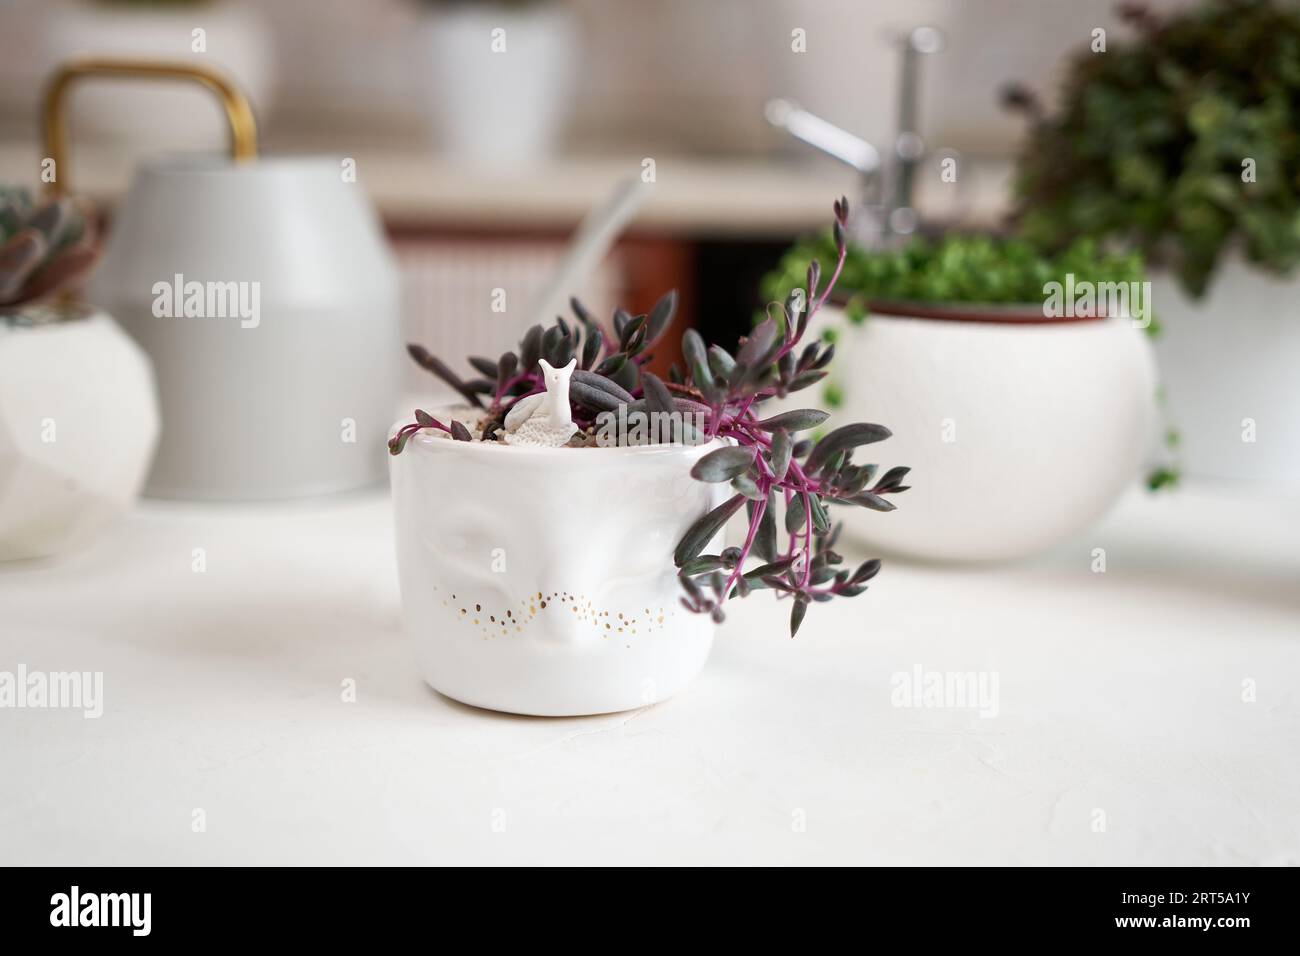 Potted othonna capensis house plant in white ceramic pot and other succulent plants on a table indoors Stock Photo